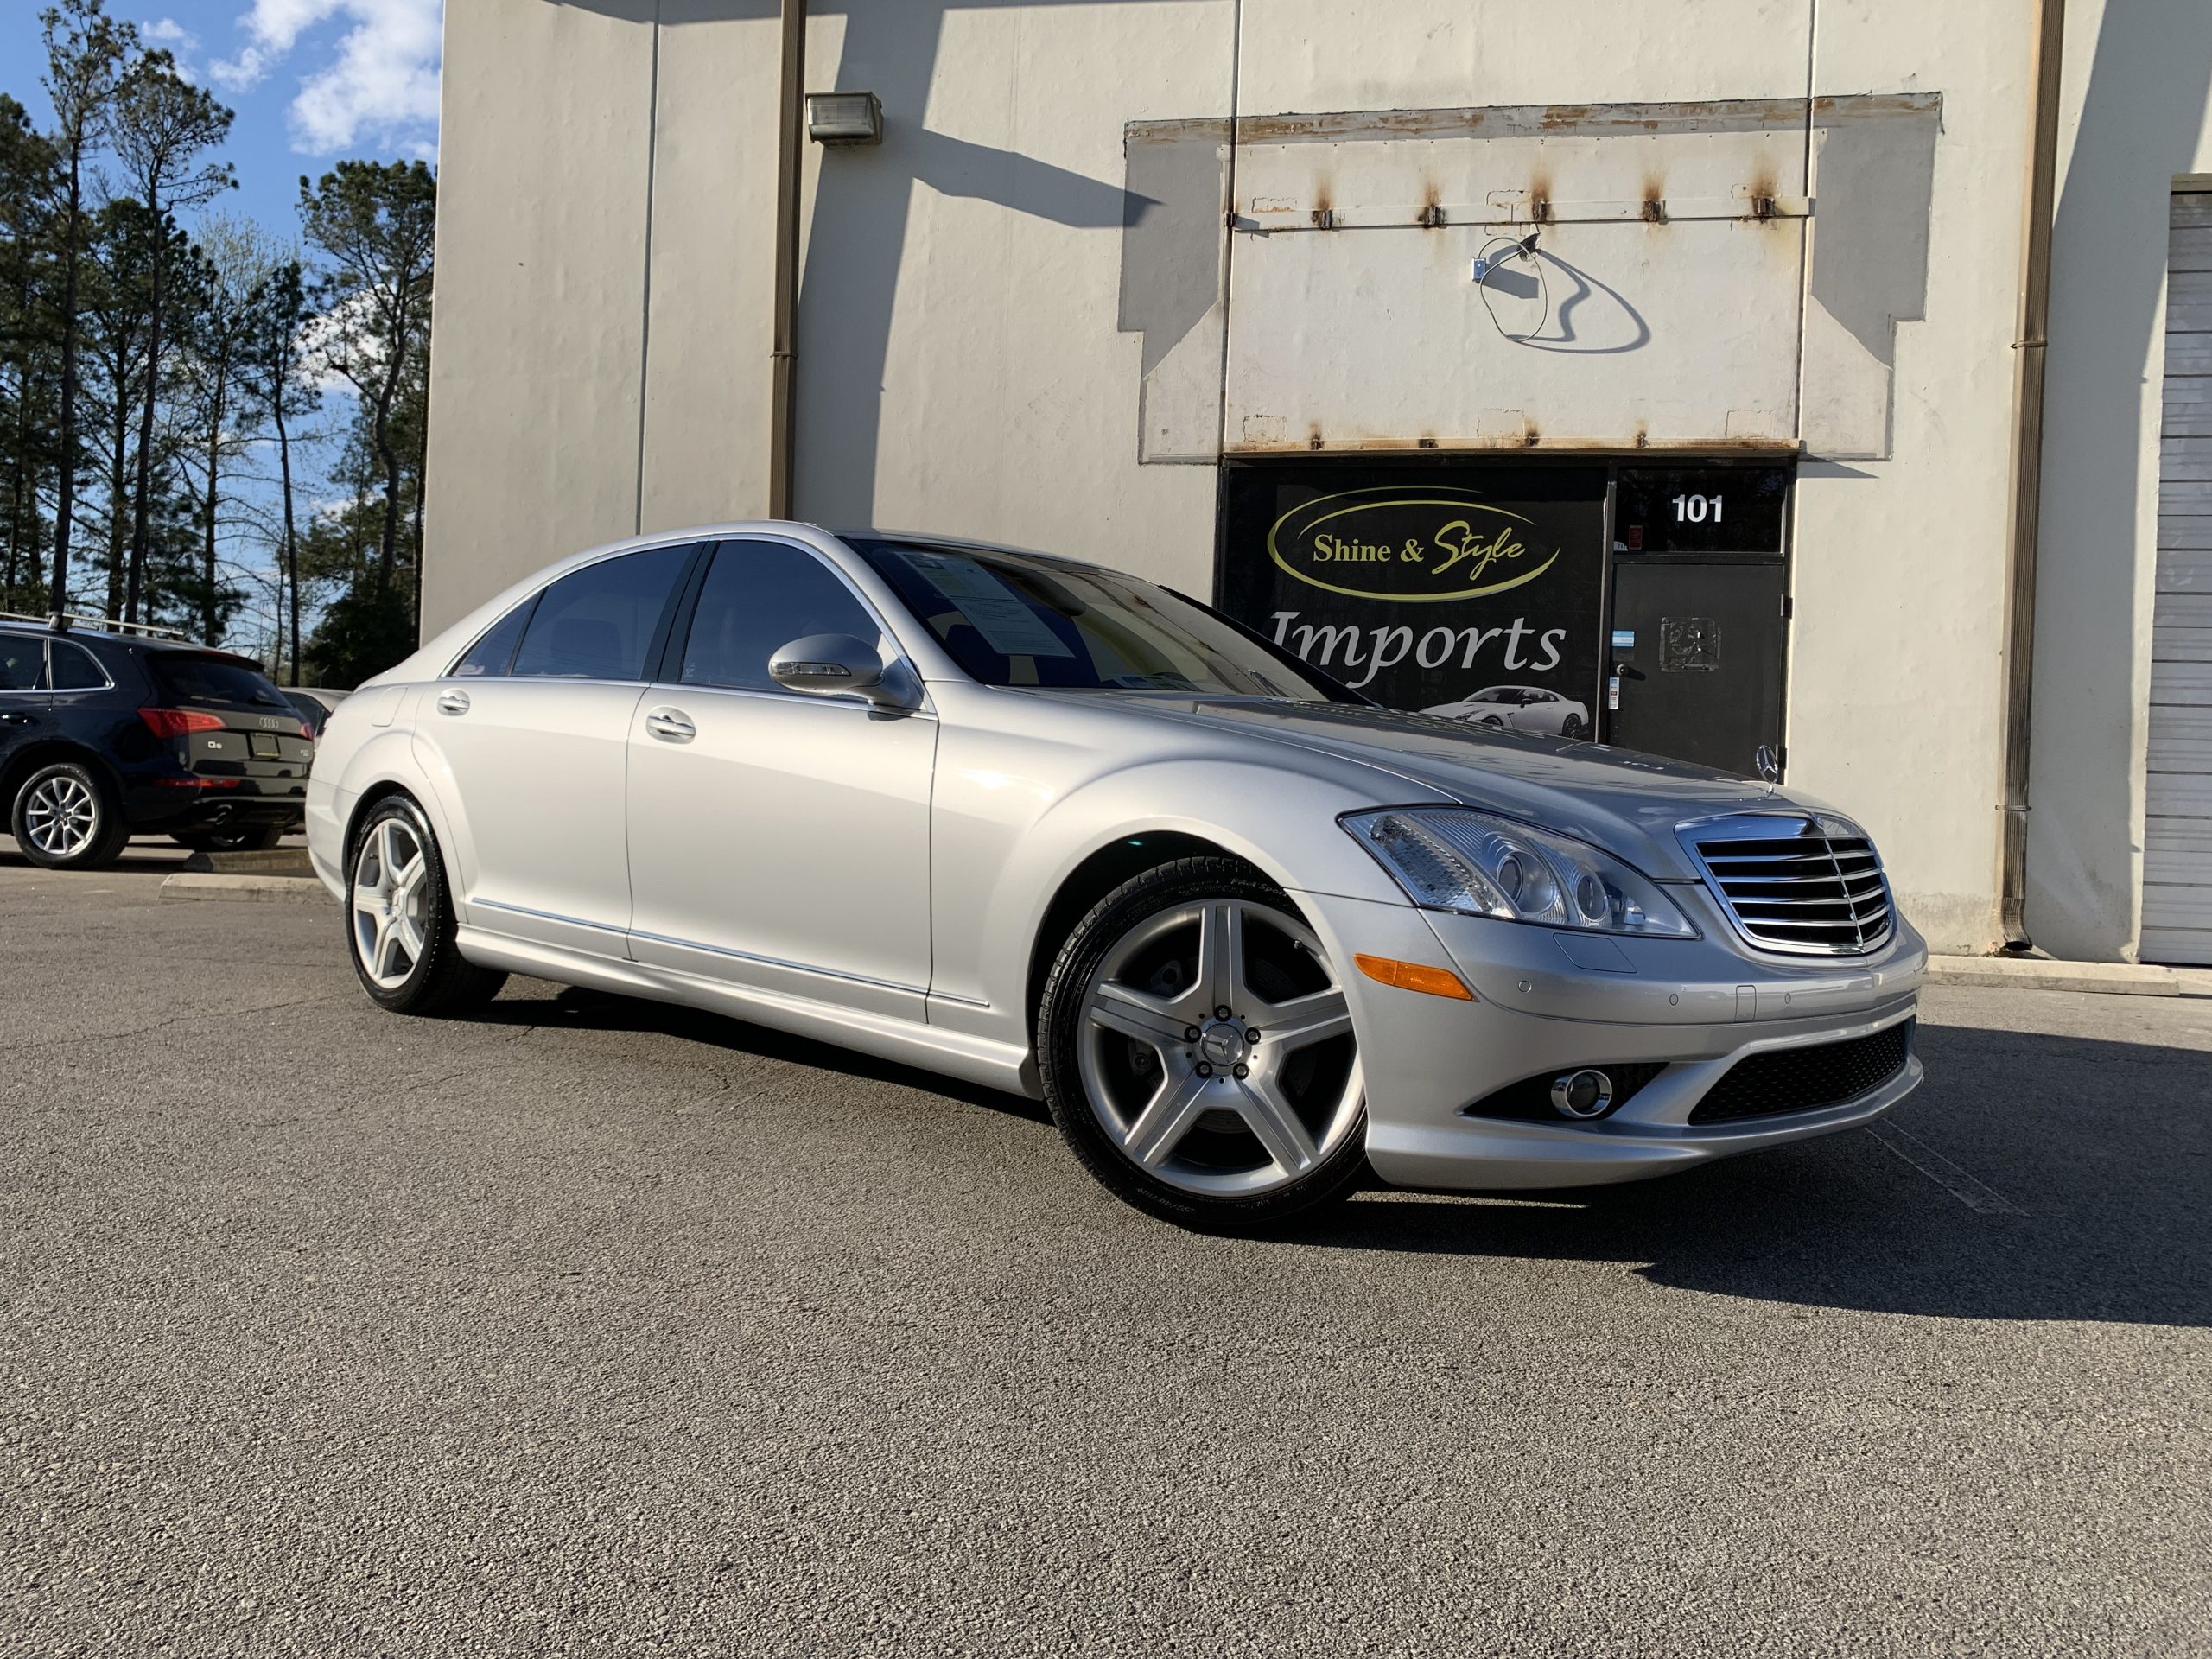 2008 Mercedes S550 for sale Raleigh NC